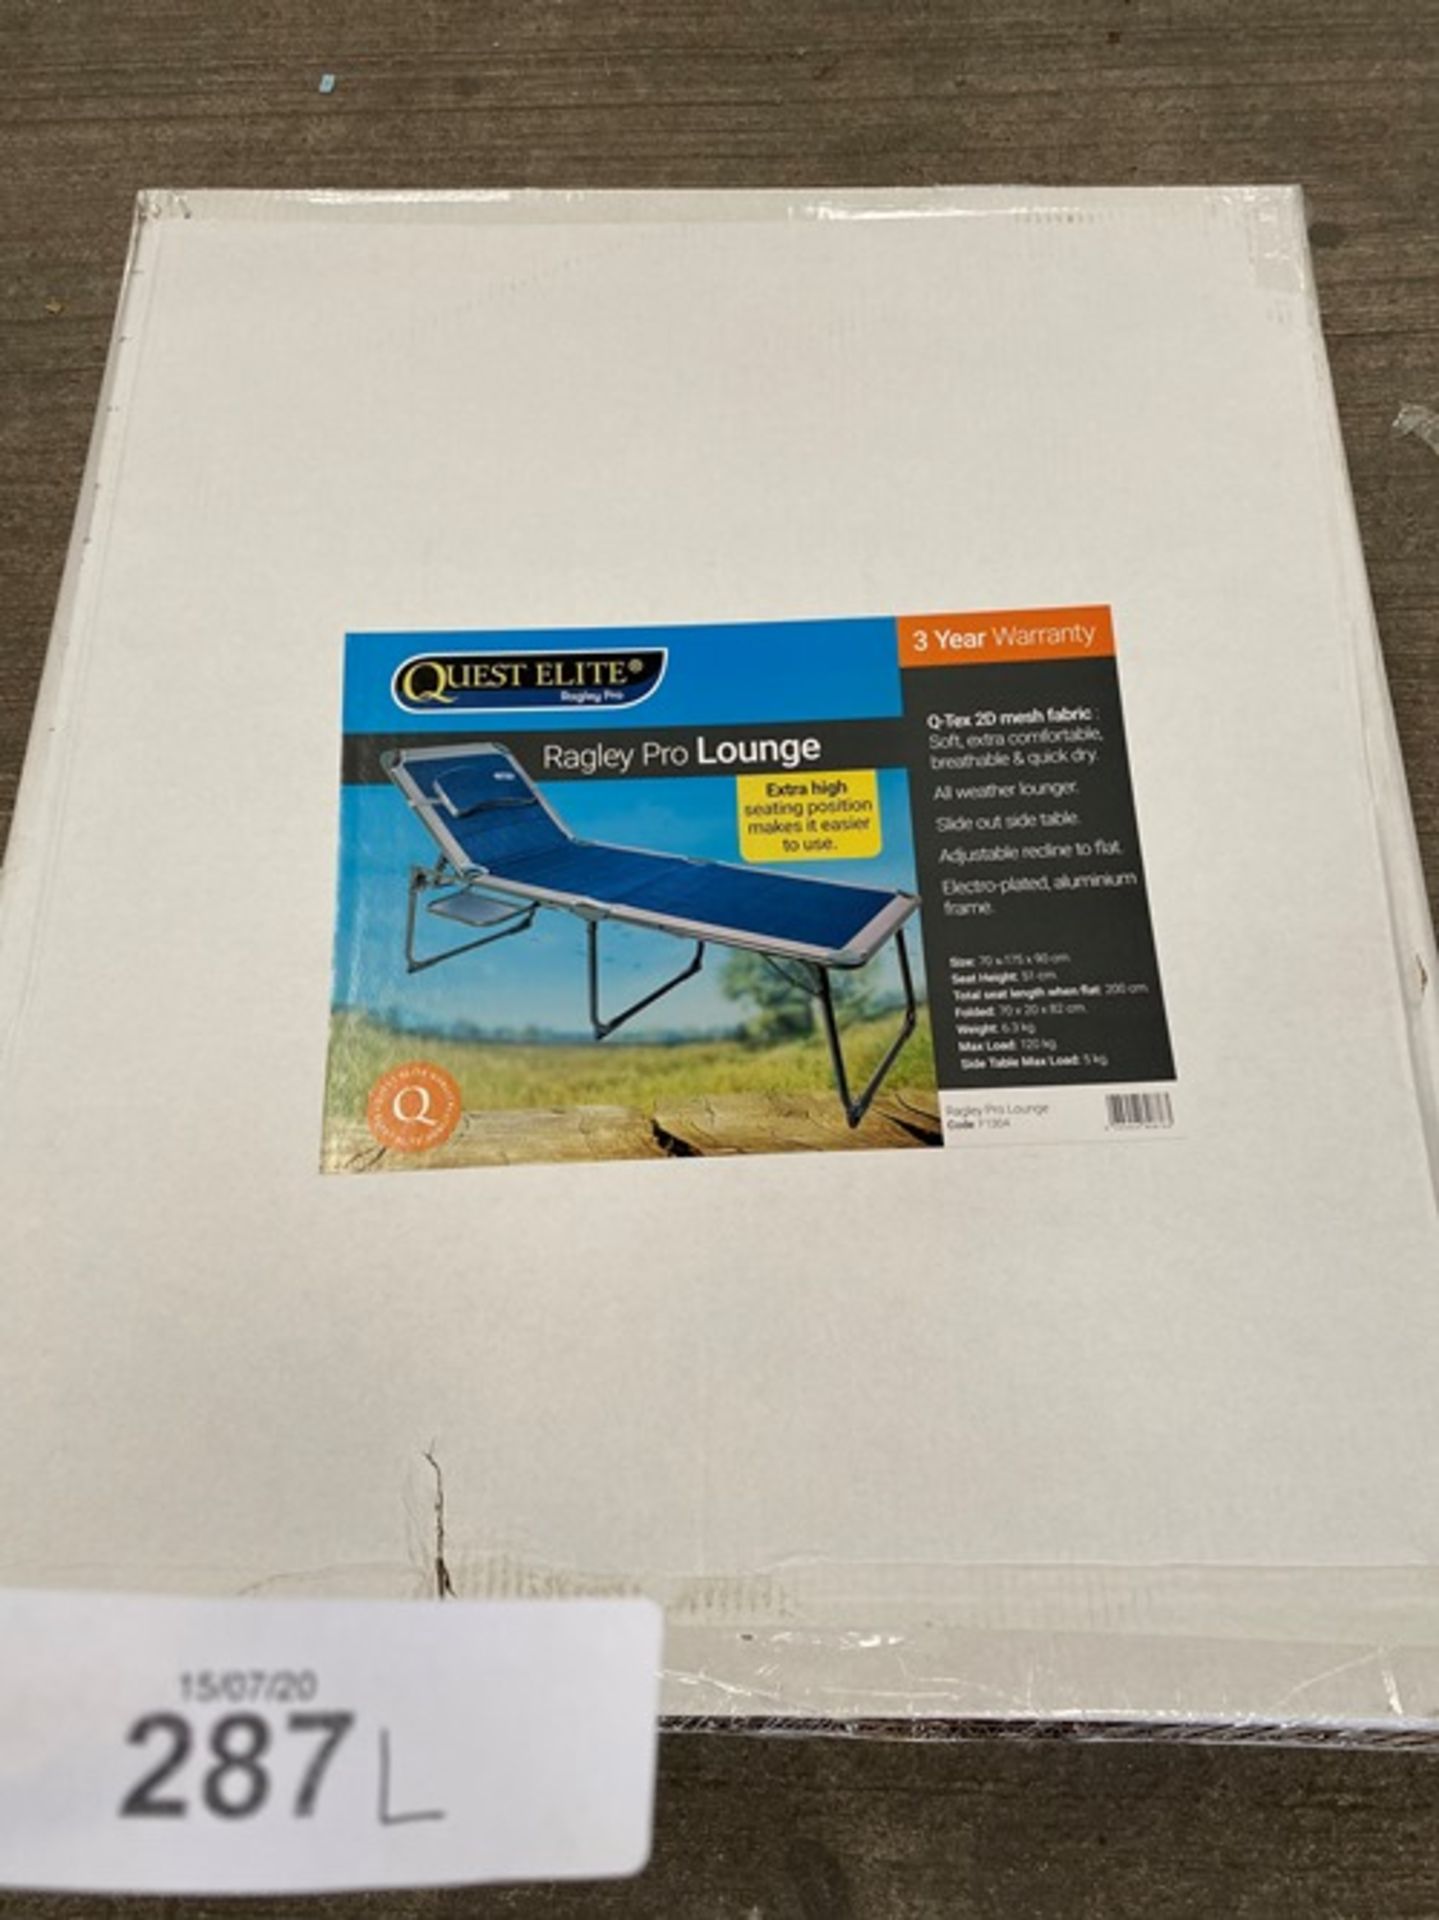 1 x Quest Elite Ragley Pro lounger, product code F1304 - New (FS)